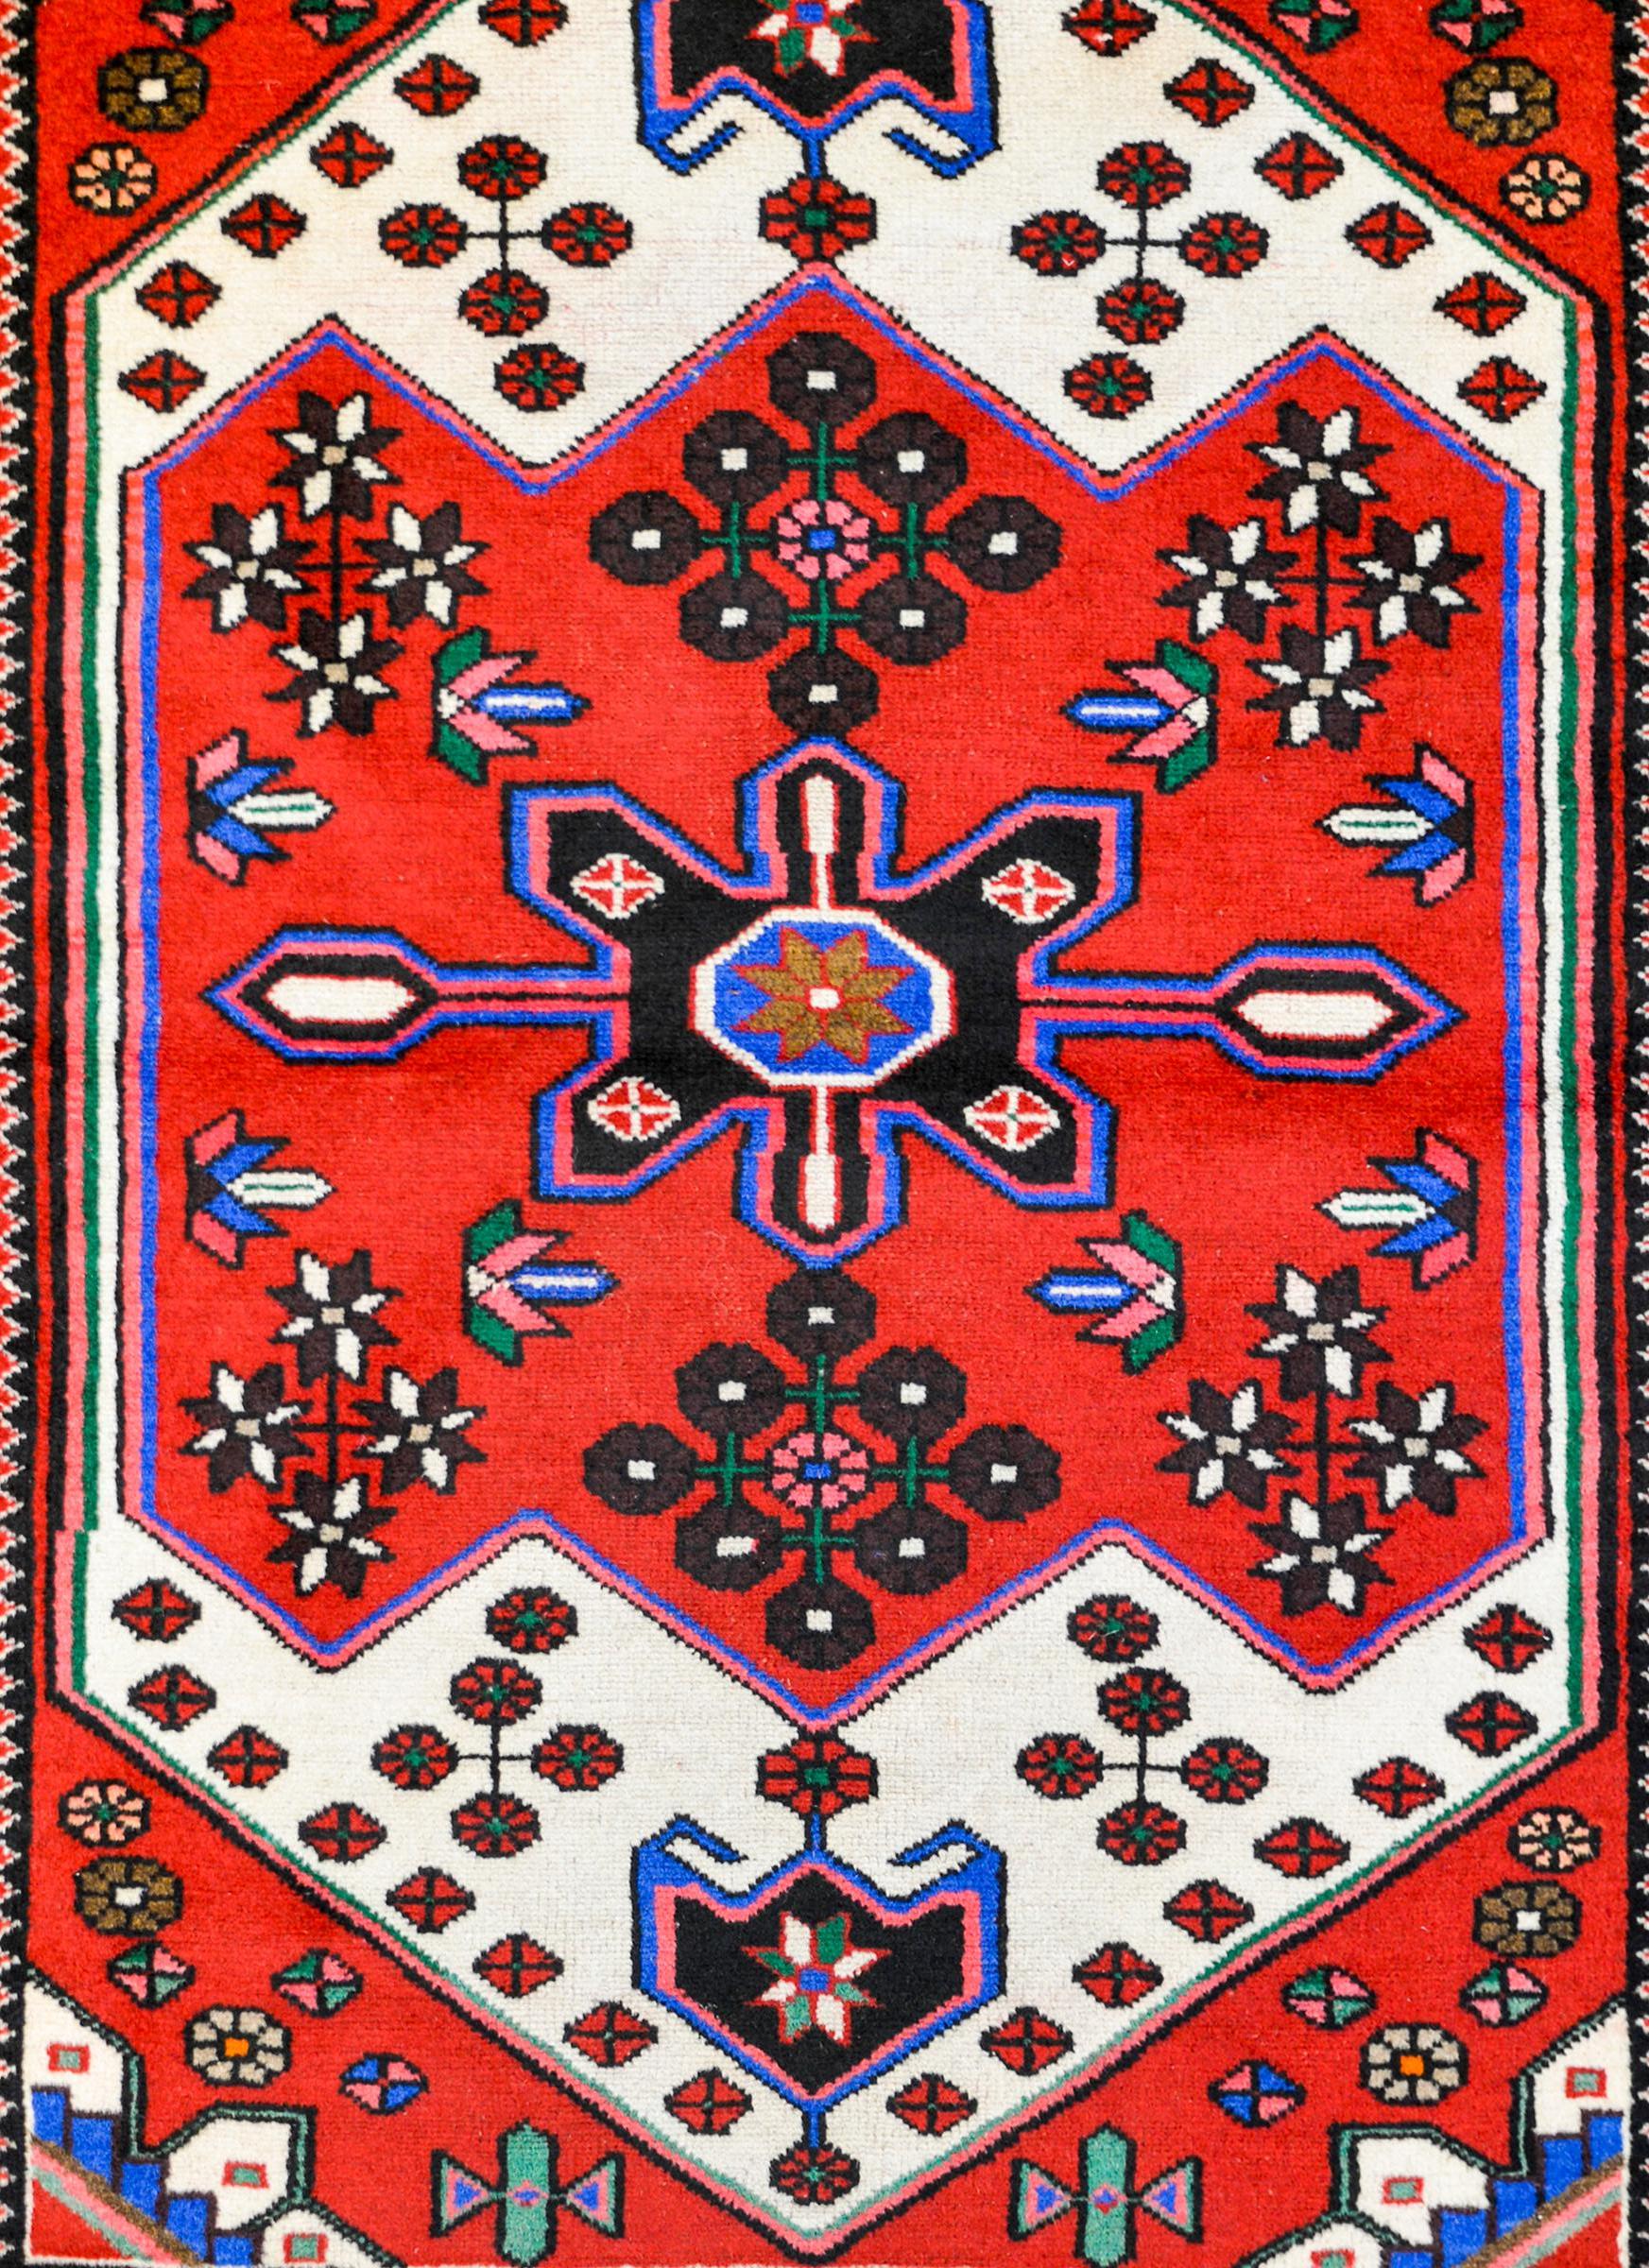 A vintage Persian Hamadan rug with myriad stylized flowers and clusters of flowers woven in white, brown, green, pink, and indigo on a bright crimson background. The border is simple with a petite flower and scrolling vine pattern flanked by petite